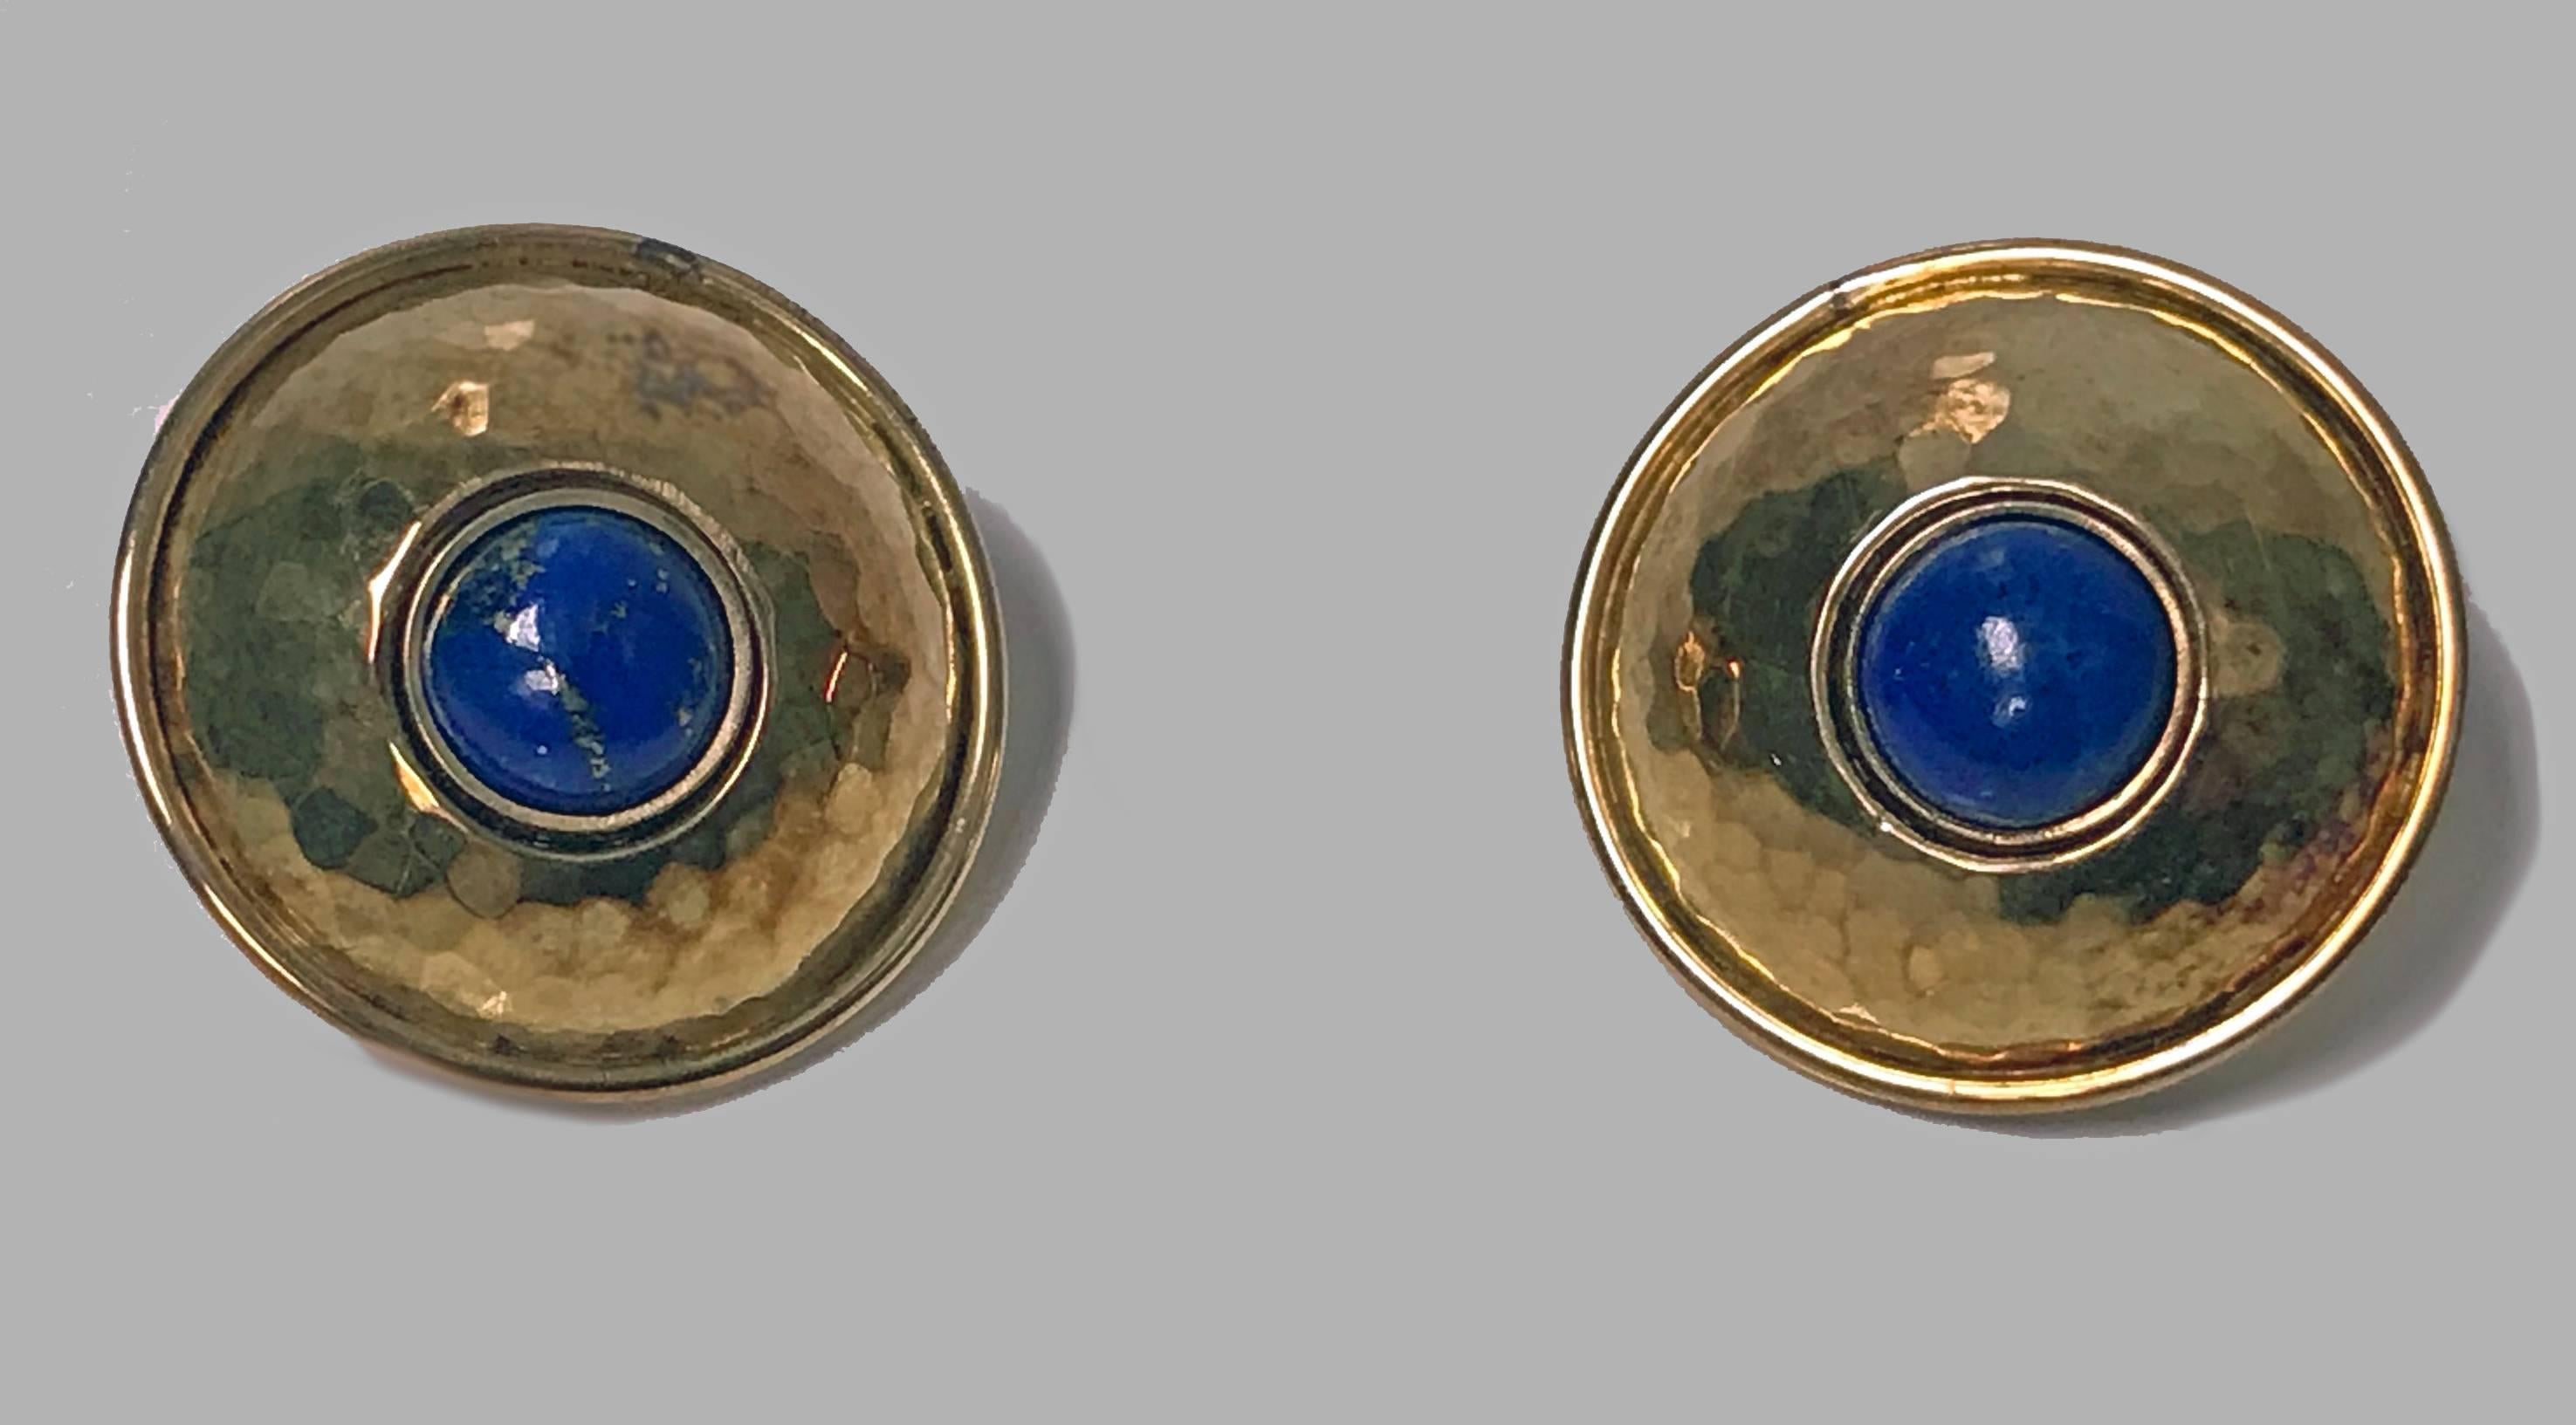 Rare Pair of Walter Schluep 18K Lapis Earrings. The handmade hand hammered Earrings of offset sphere dome form, bezel set with cabochon lapis. Signed on reverse, Schluep 18K. Clip fitments. Diameter: 20.04 mm. Item Weight: 12.61 grams. Spanish born,